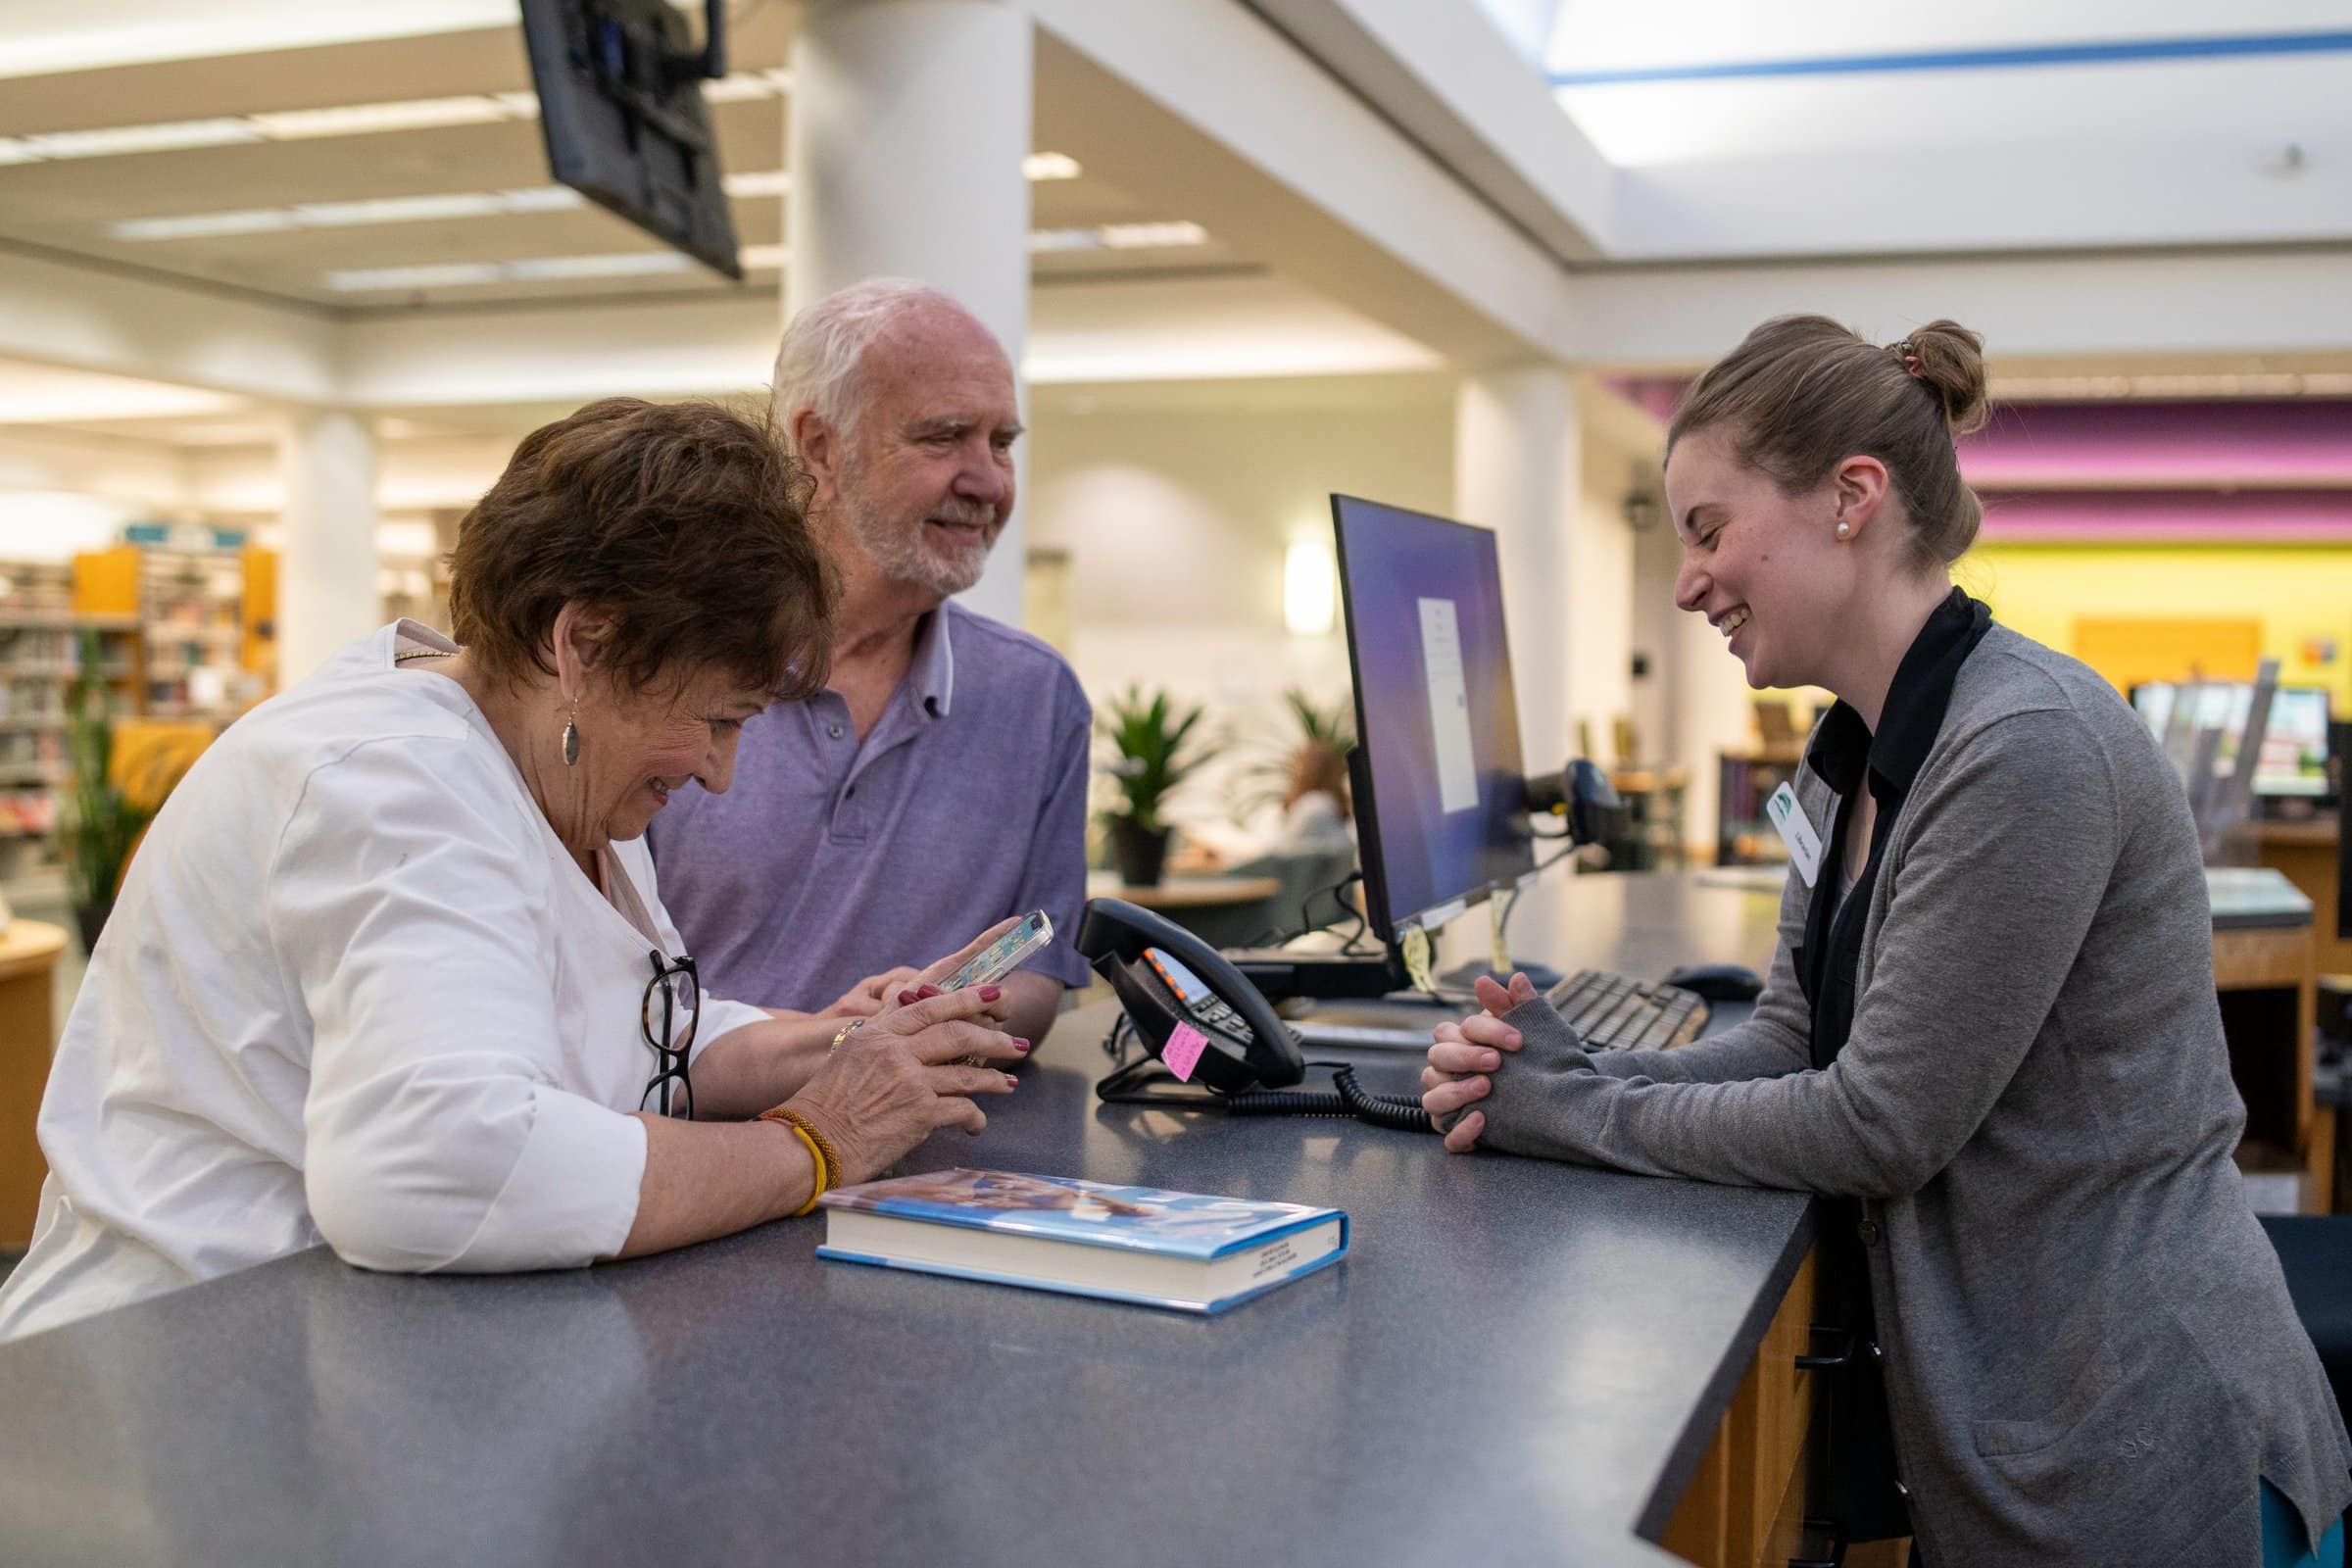 Librarian helping an elderly couple with technology